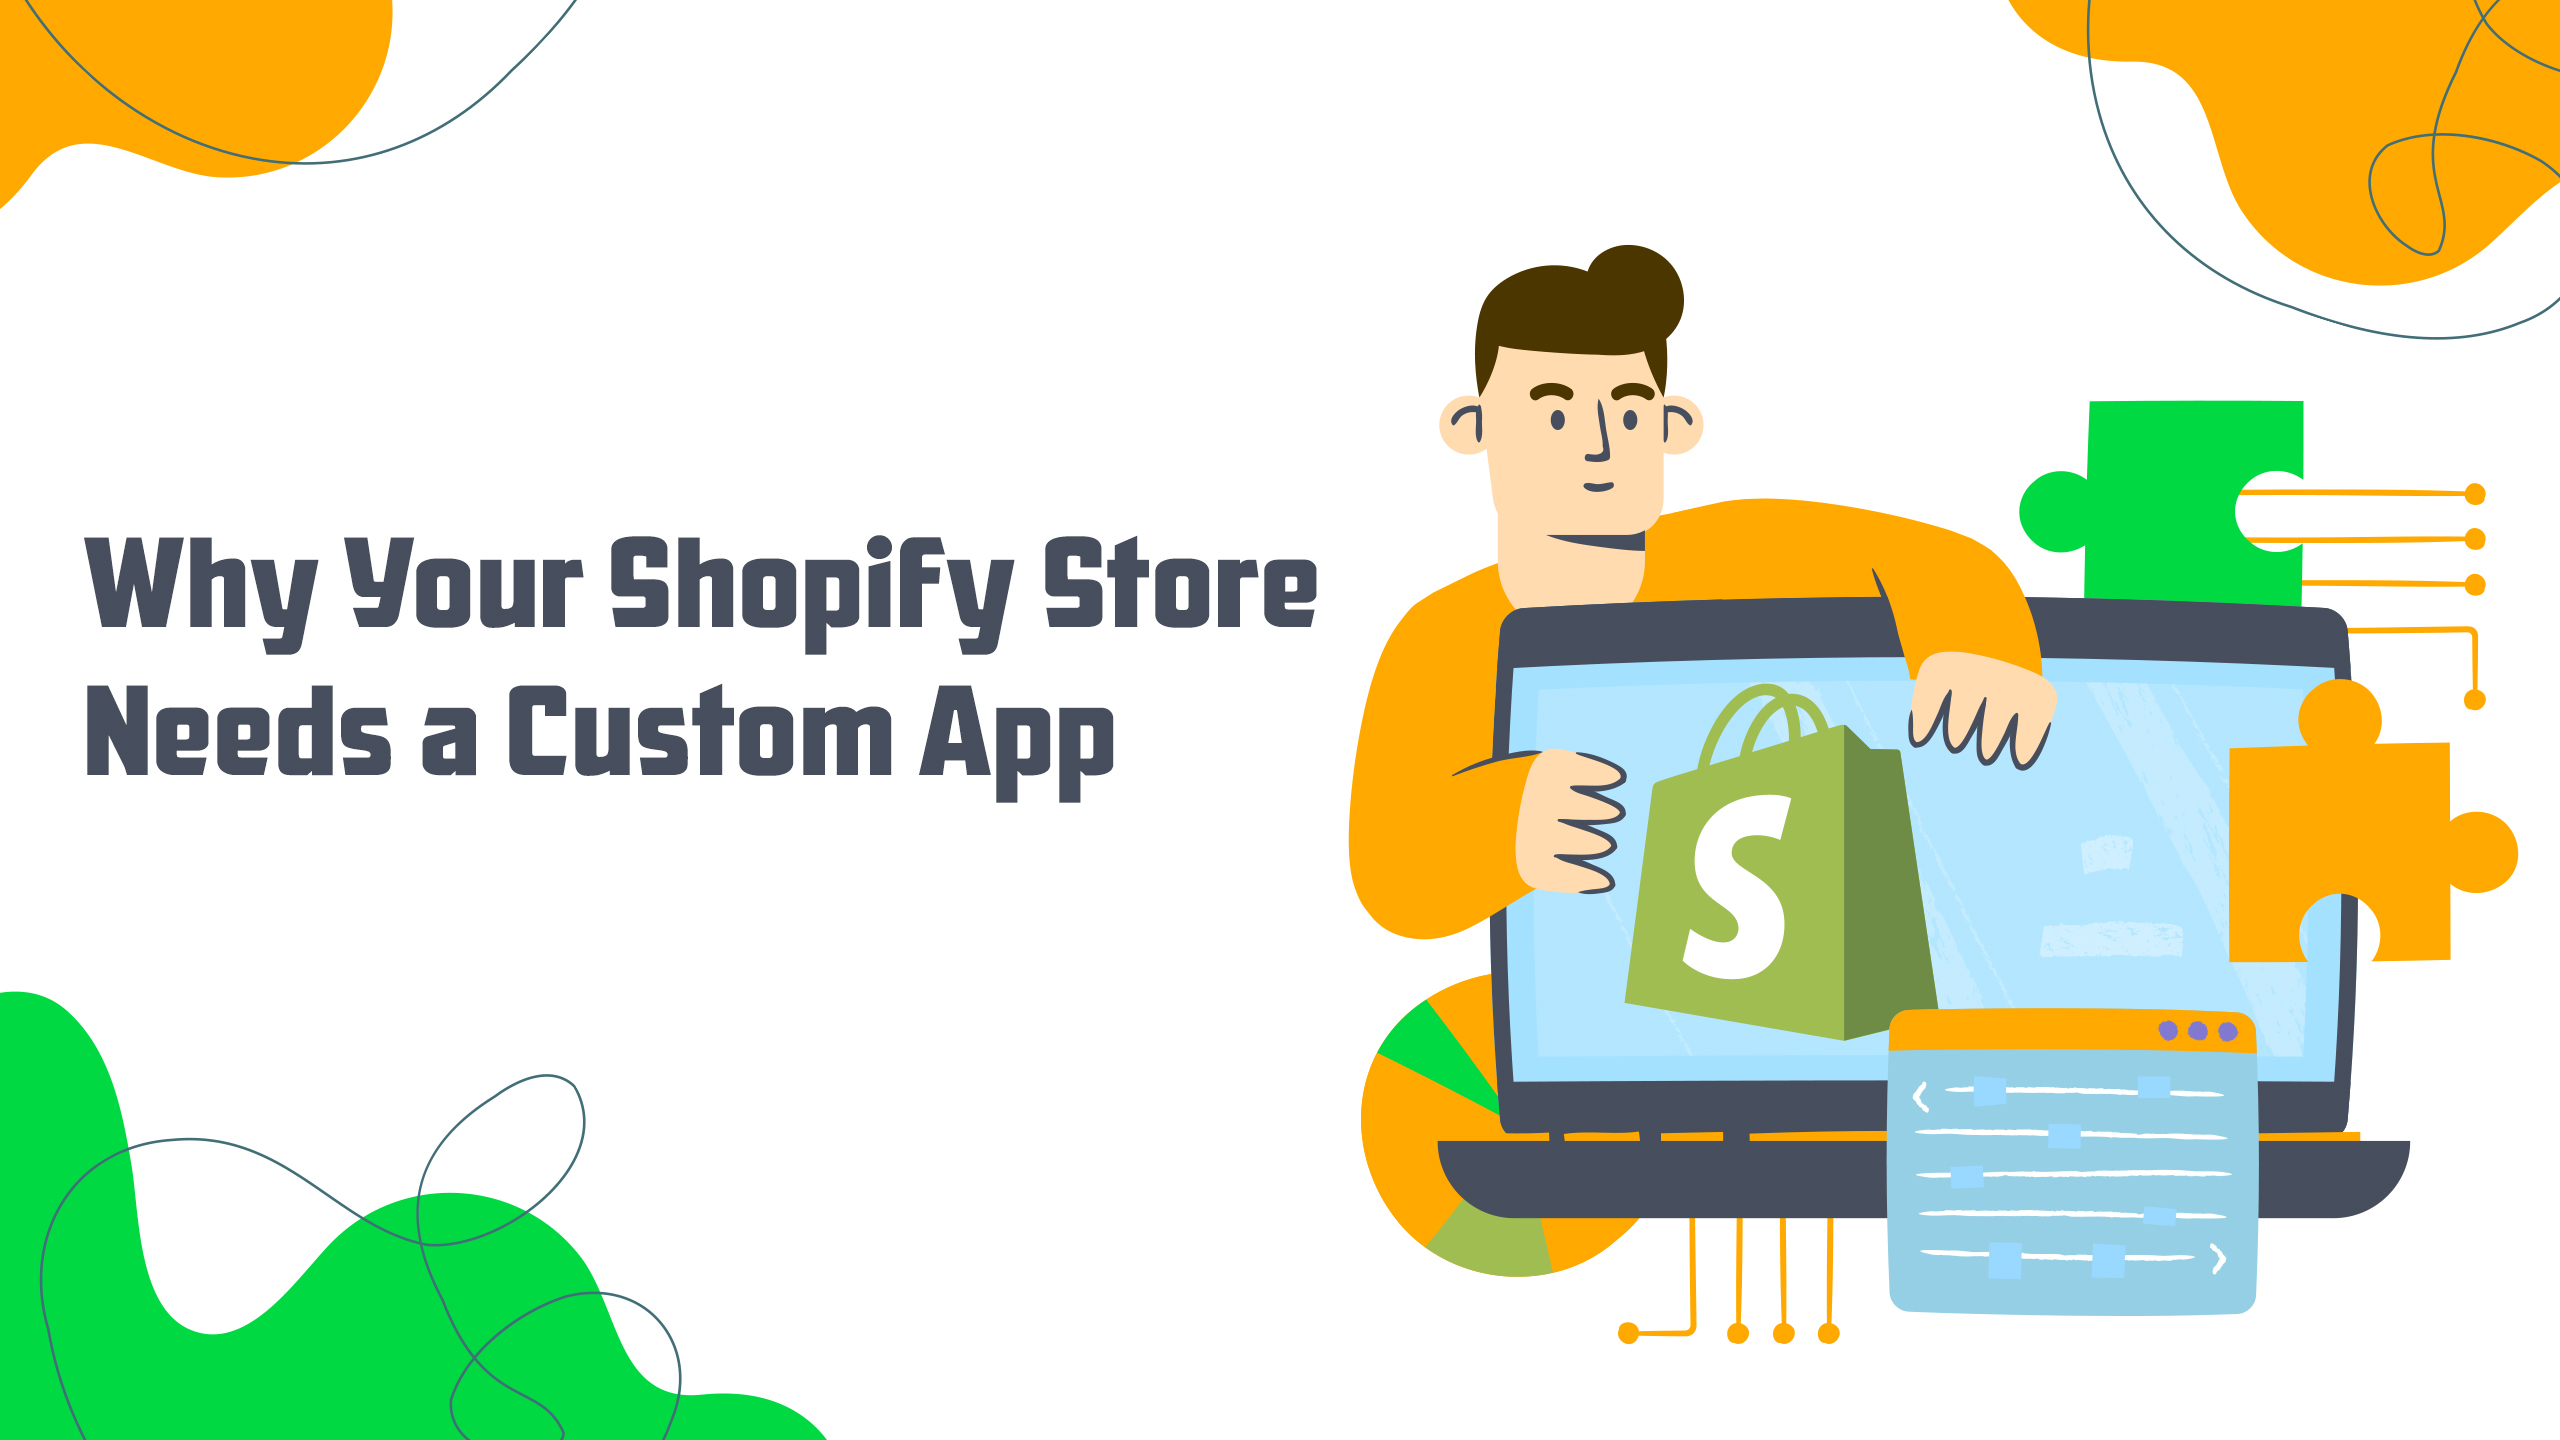 Why Your Shopify Store Needs a Custom App